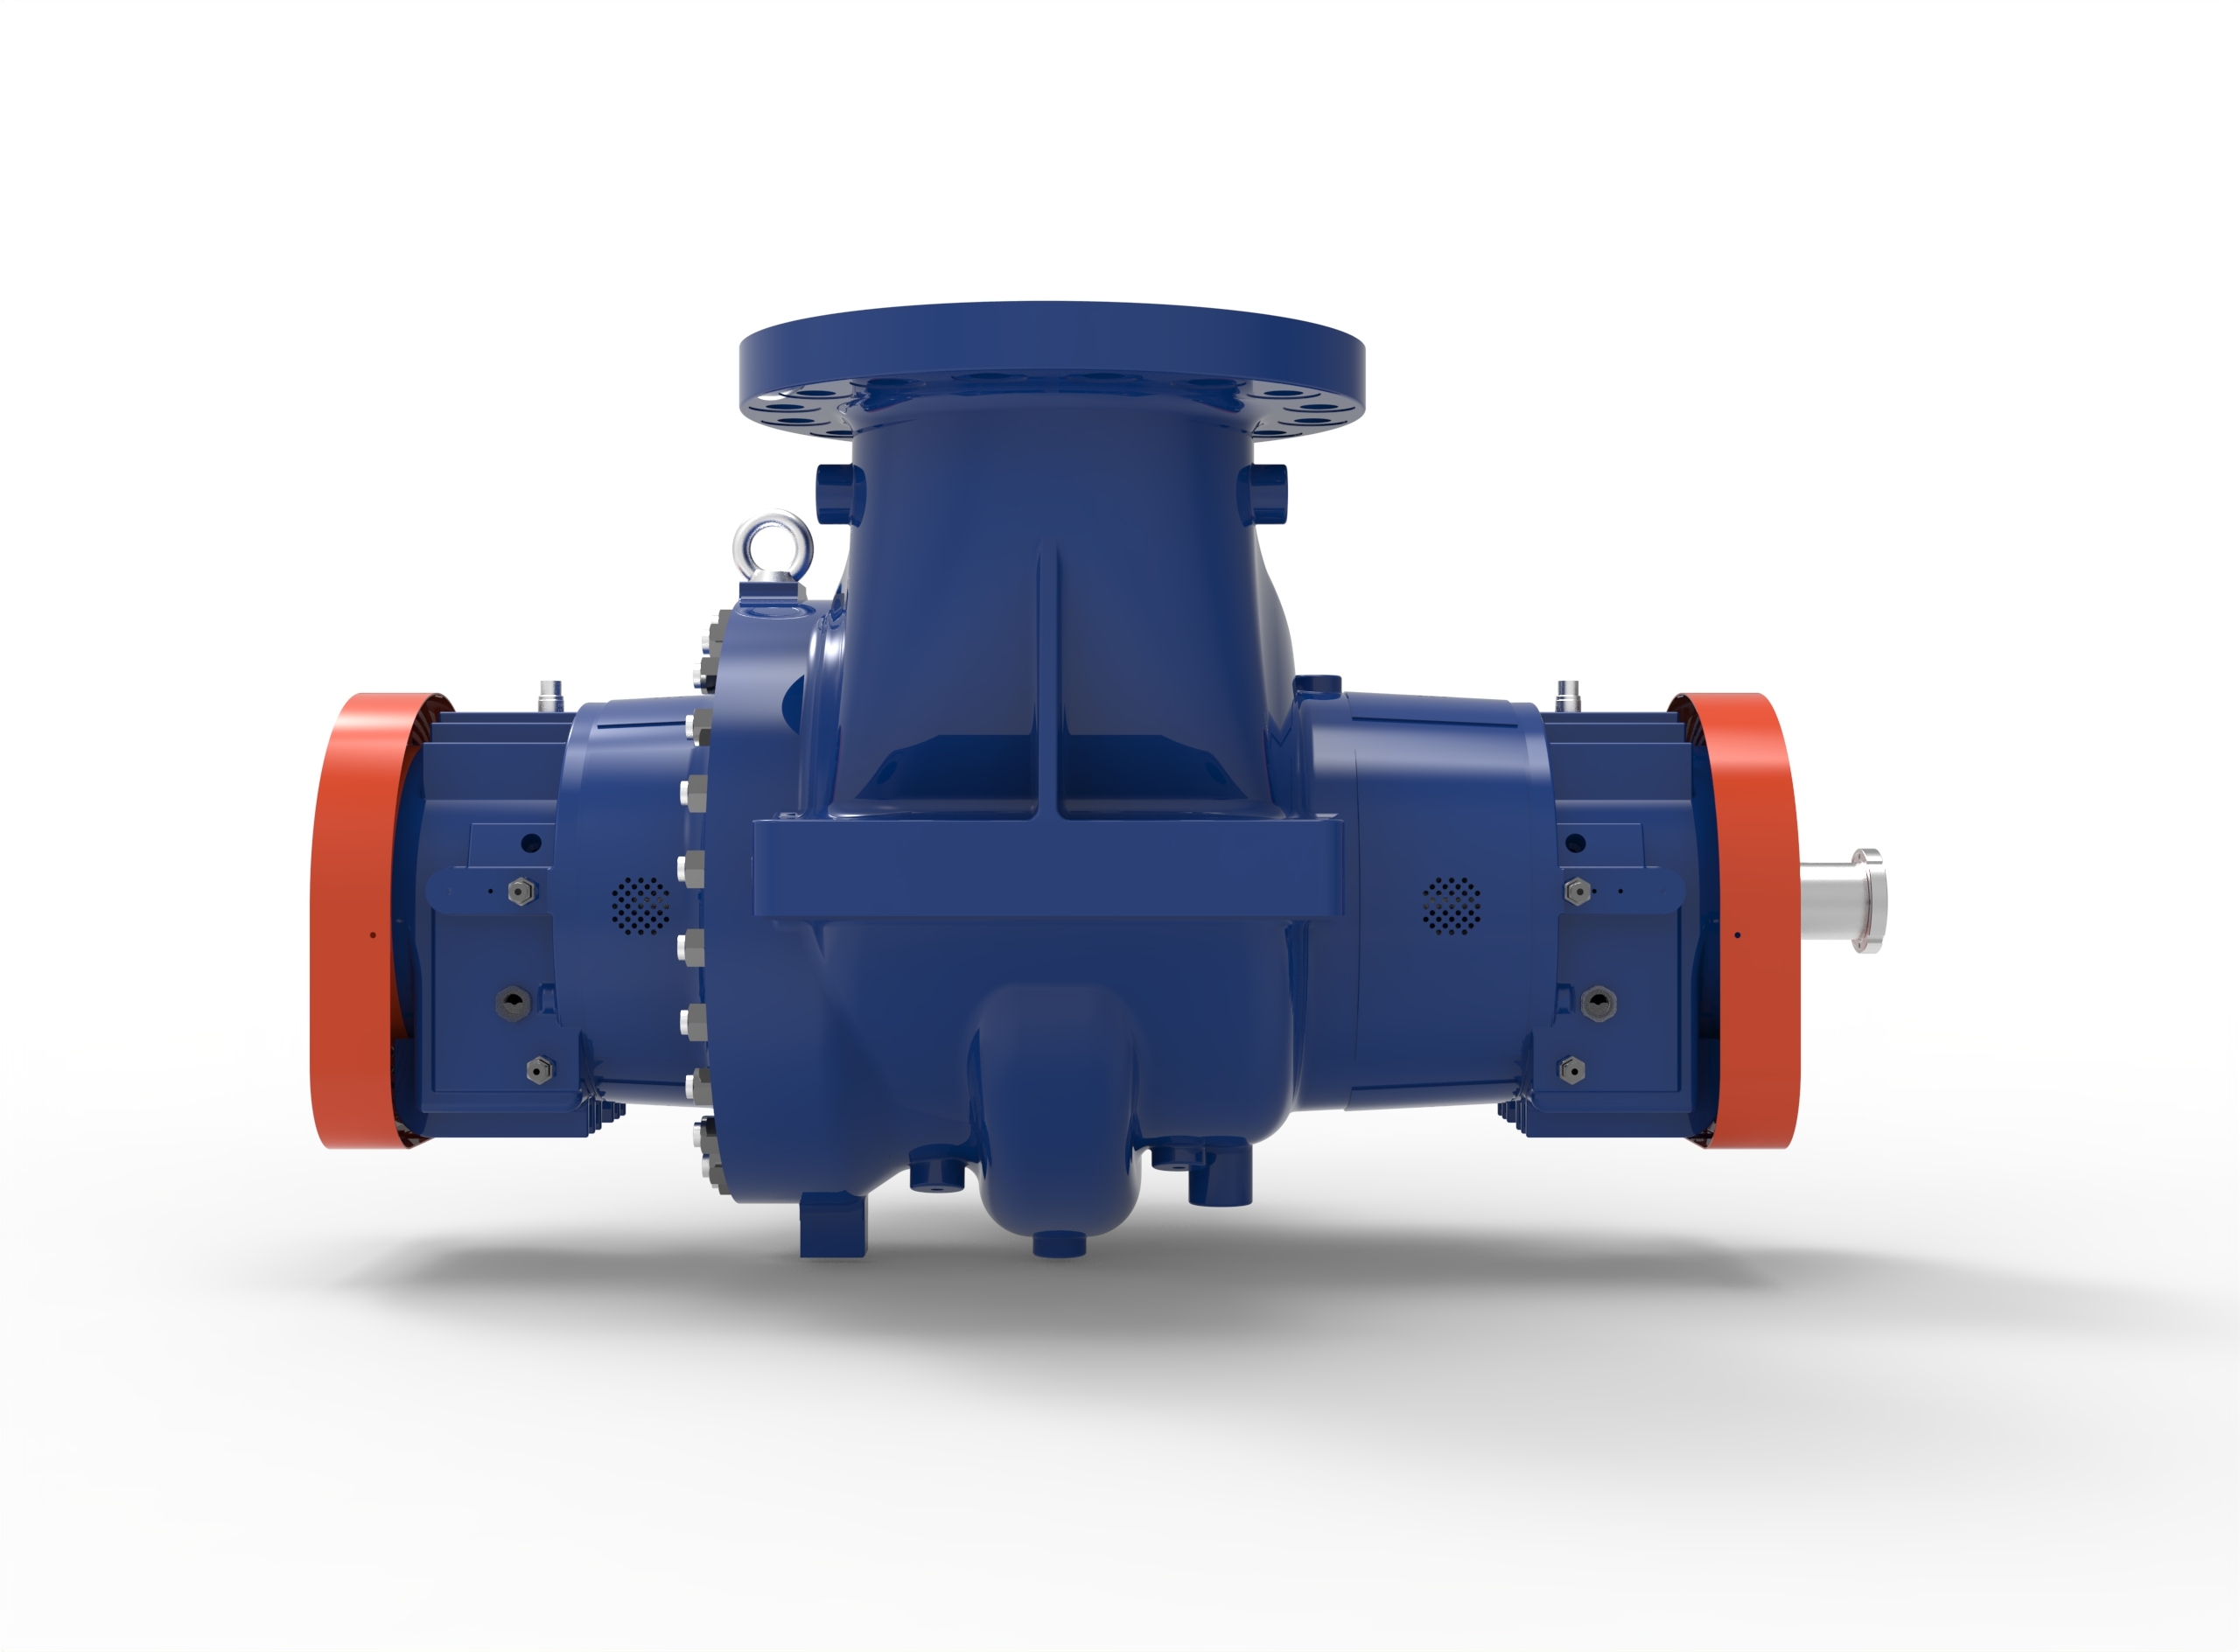 Front view of a Termomeccanica Pompe DP BB2 TYPE API 610 Centrifugal Pump manufactured by Trillium Flow Technologies